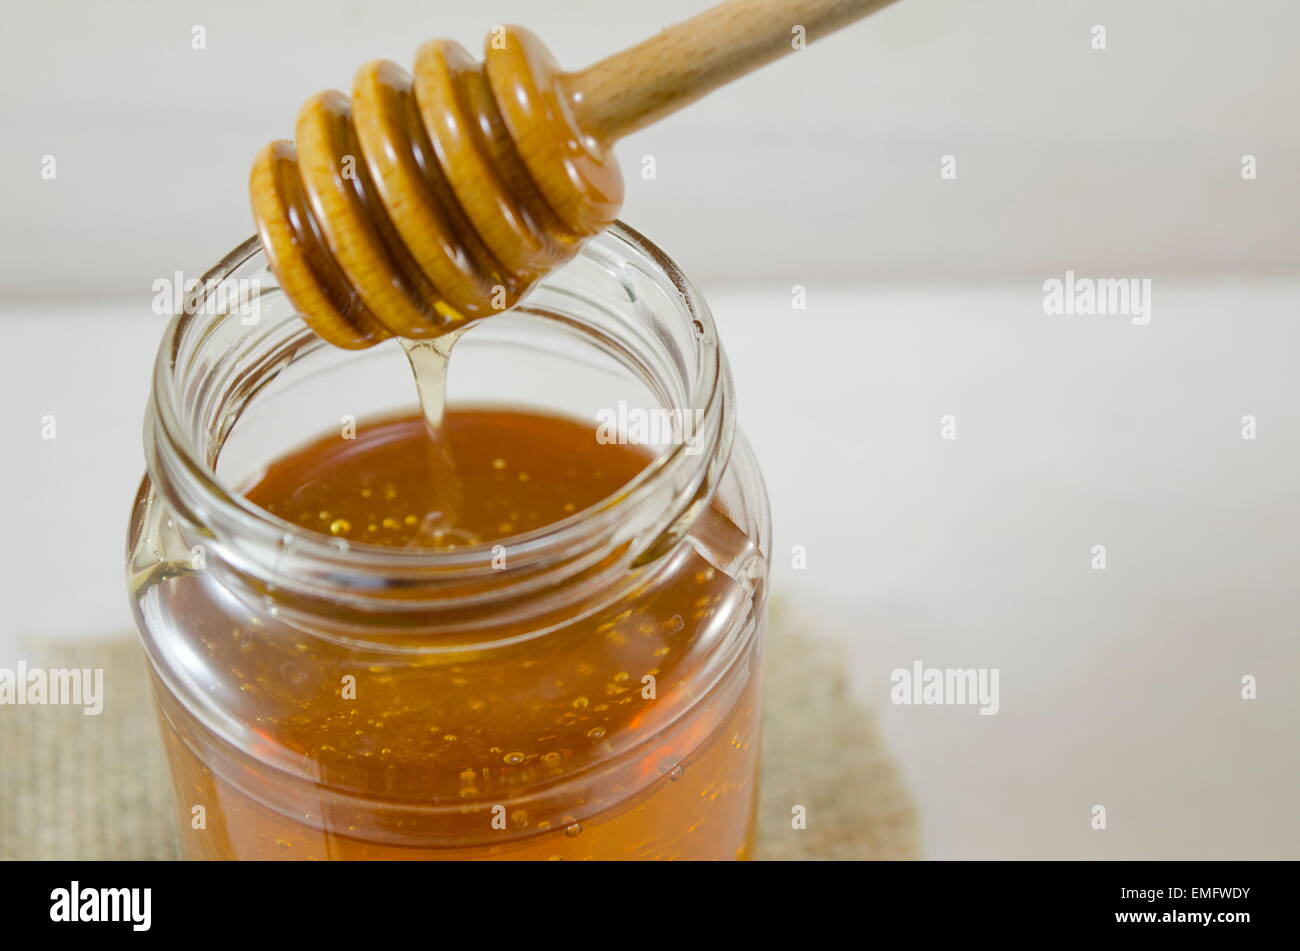 Honey dripping into a glass jar from a special wooden spoon Stock Photo